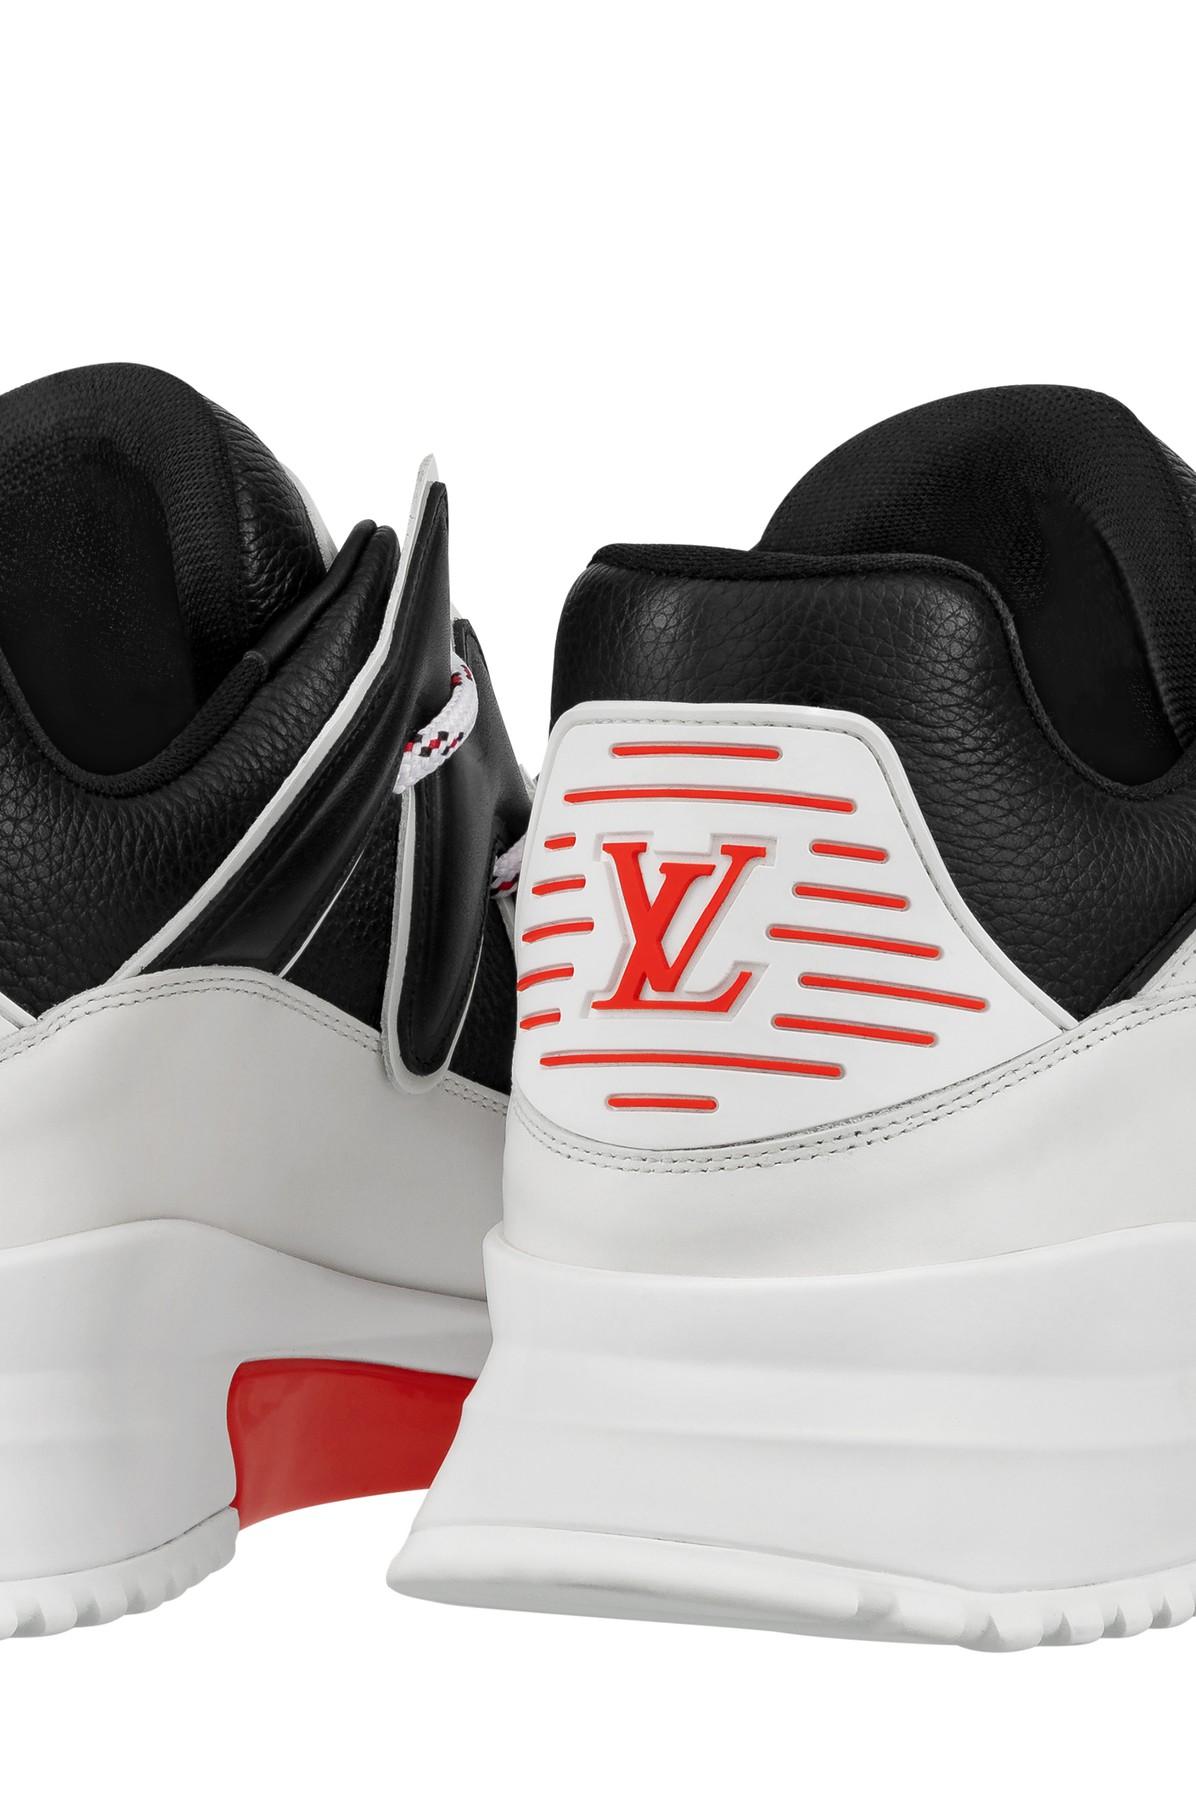 new louis vuitton sneakers